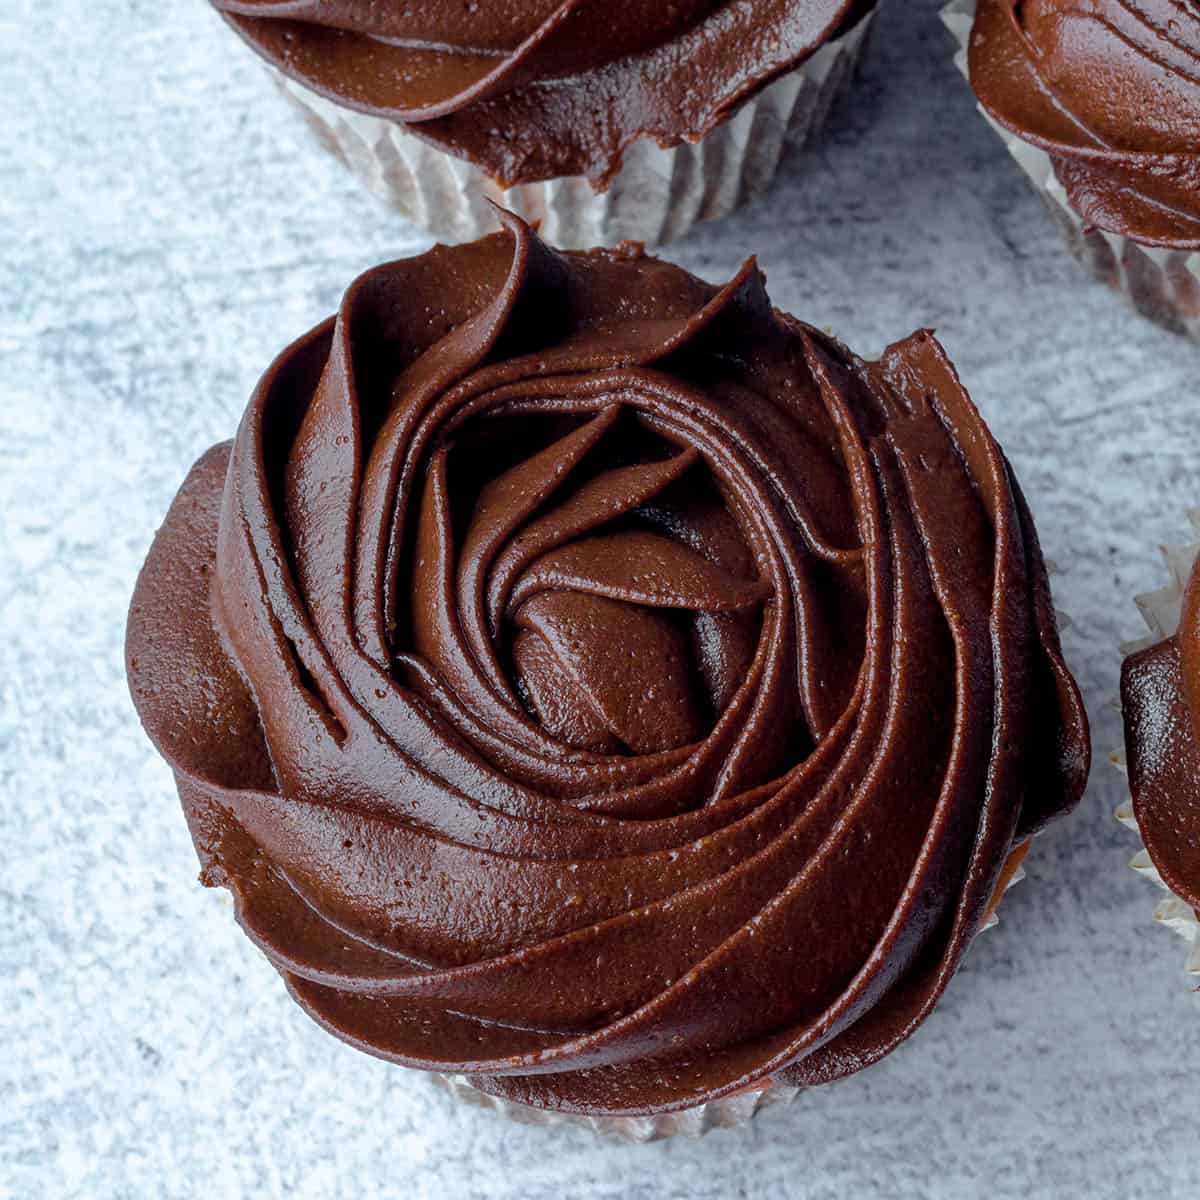 top view of smooth chocolate frosting in a rose shape on a cupcake with a grey background